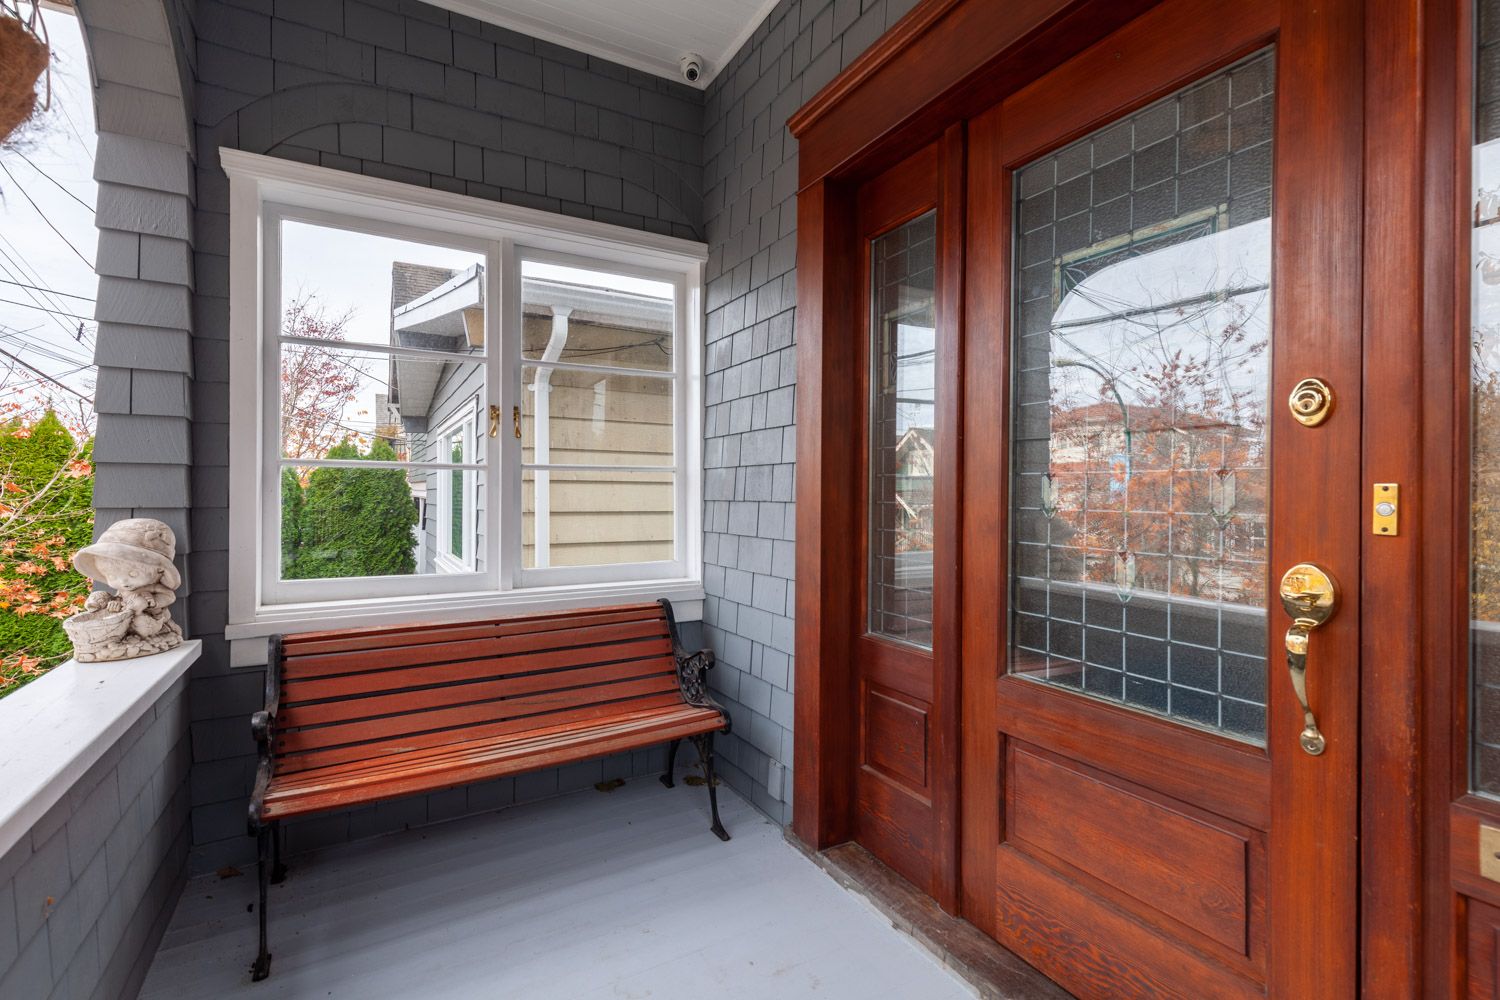 Main Photo: 120 24 Avenue in Vancouver: Main House for sale (Vancouver East)  : MLS®# R2419469